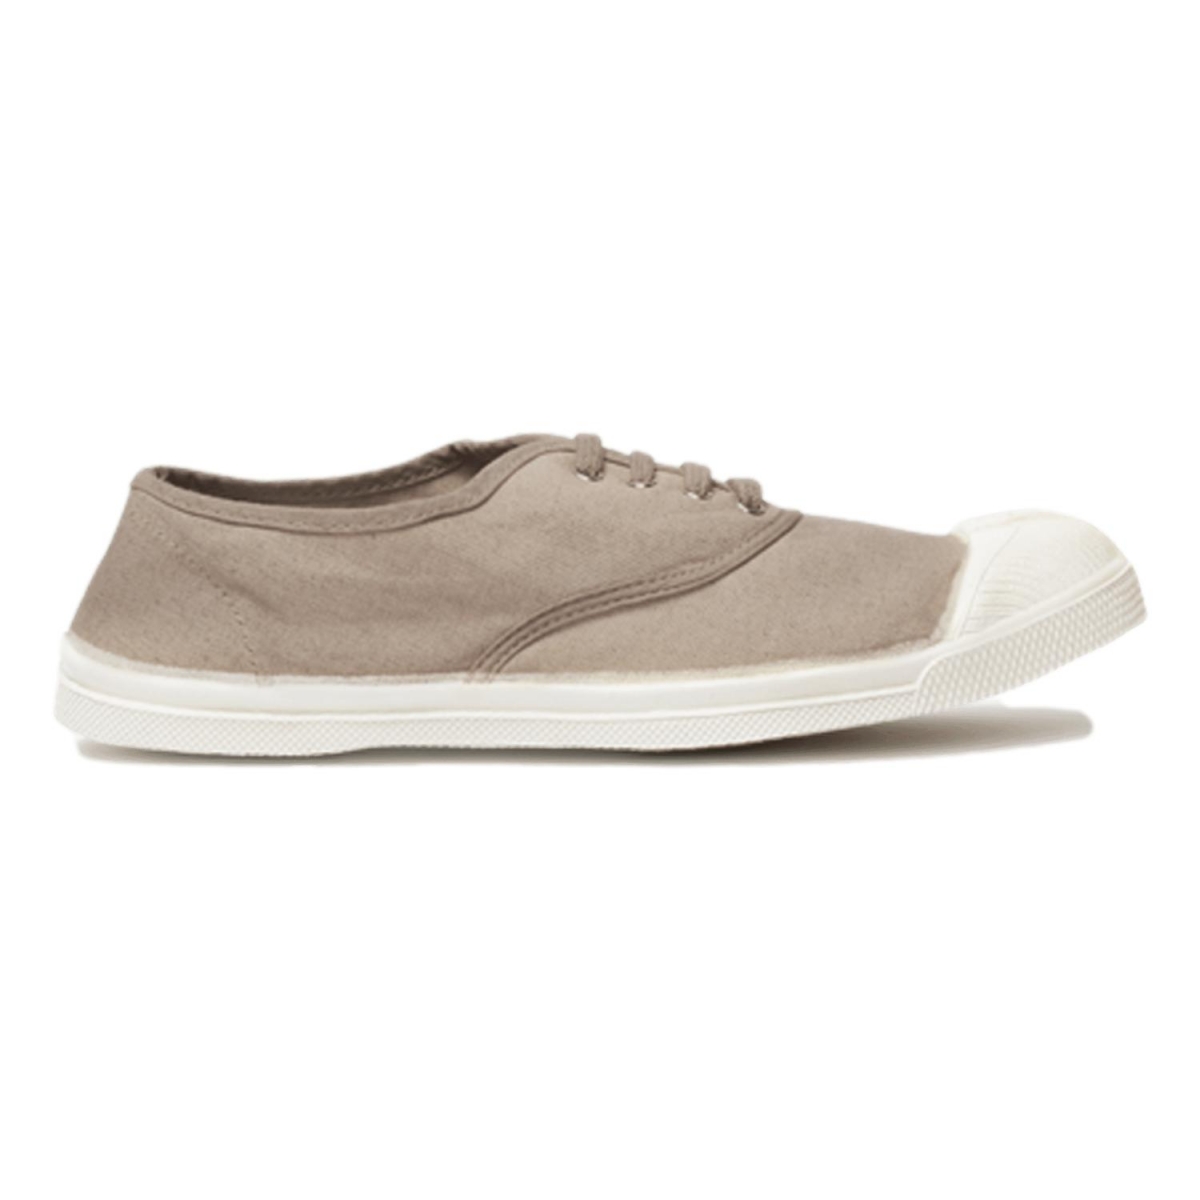 Bensimon Lace tennis sneakers adult egg shell F15004 - 0105